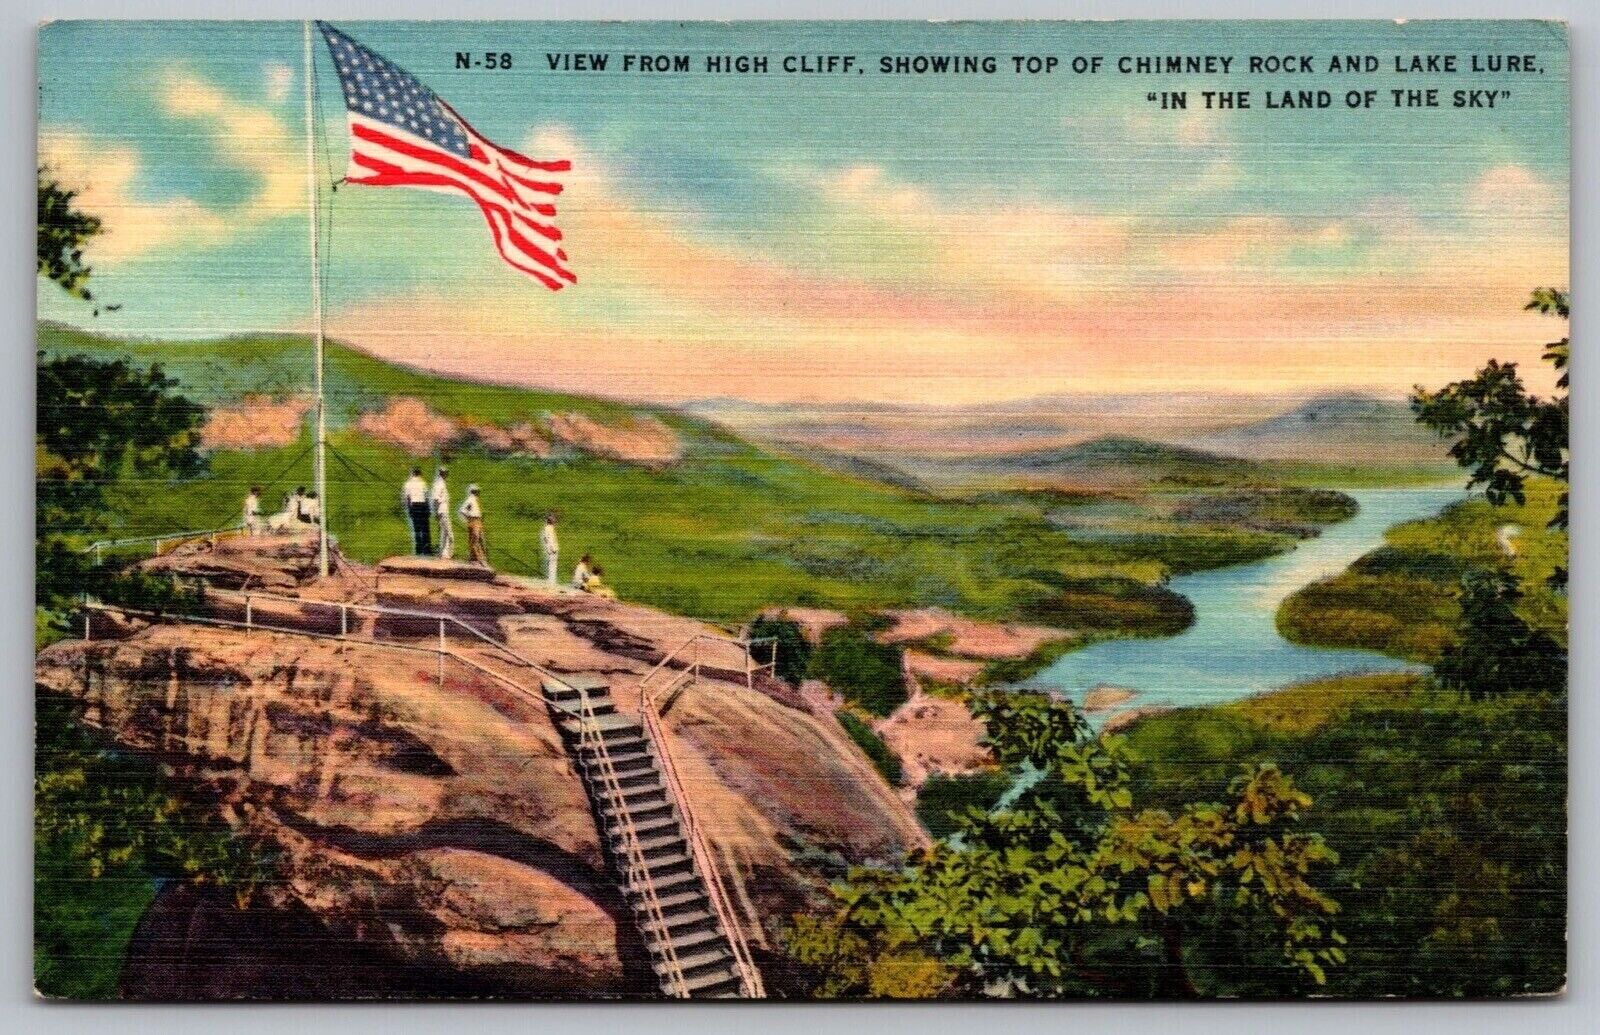 View From High Cliff Chimney Rock Lake Lure Flag Linen Postcard